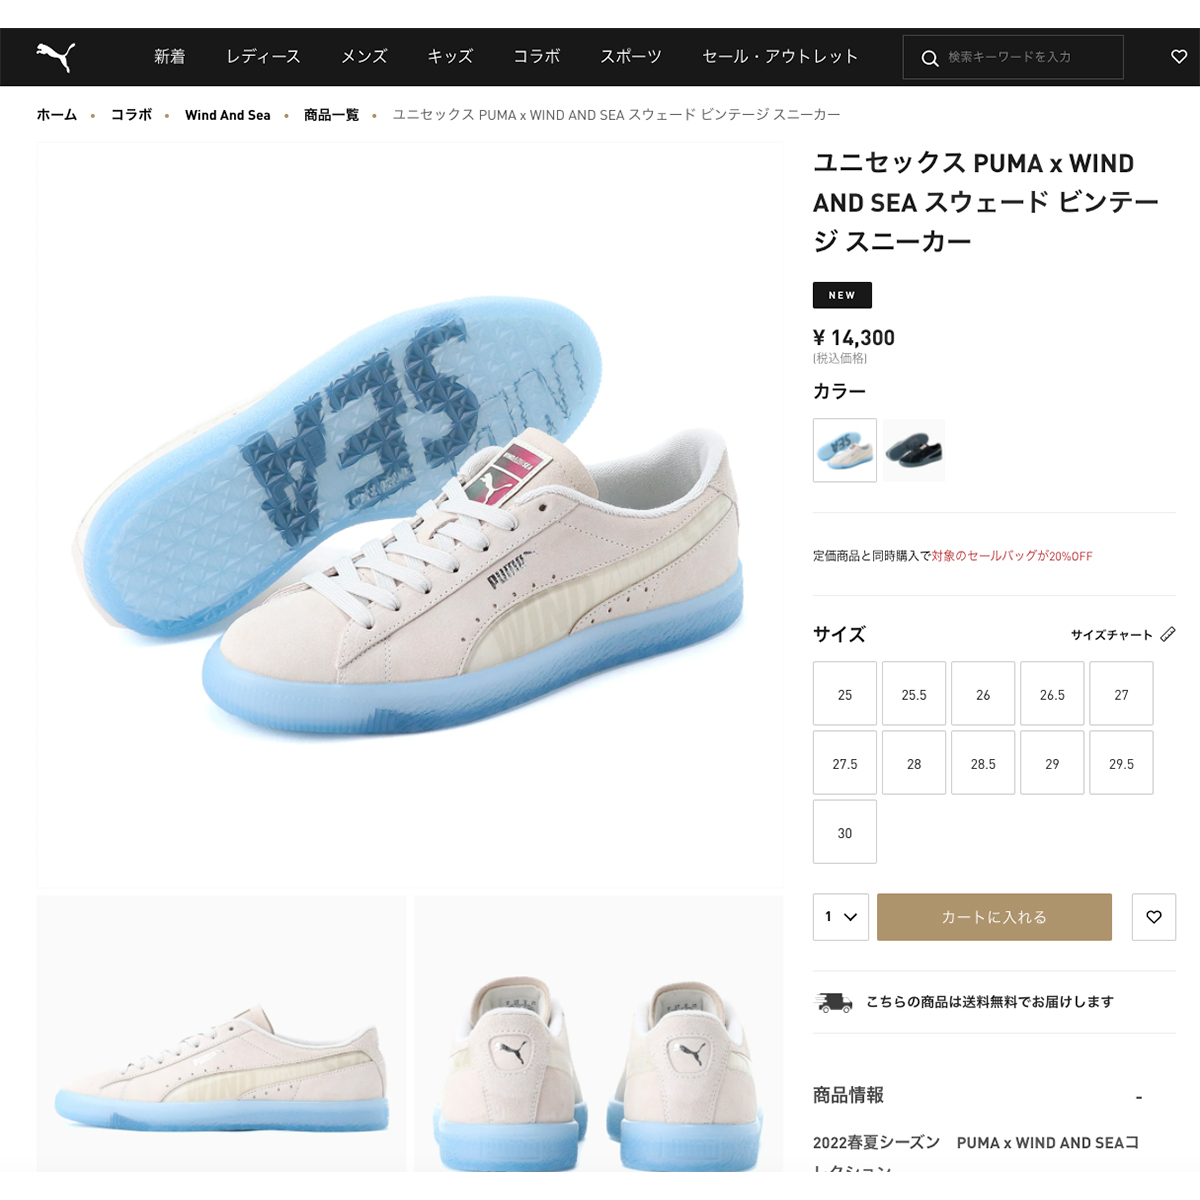 PUMA SUEDE VTG WIND AND SEA プーマ スウェード ヴィンテージ ウィン